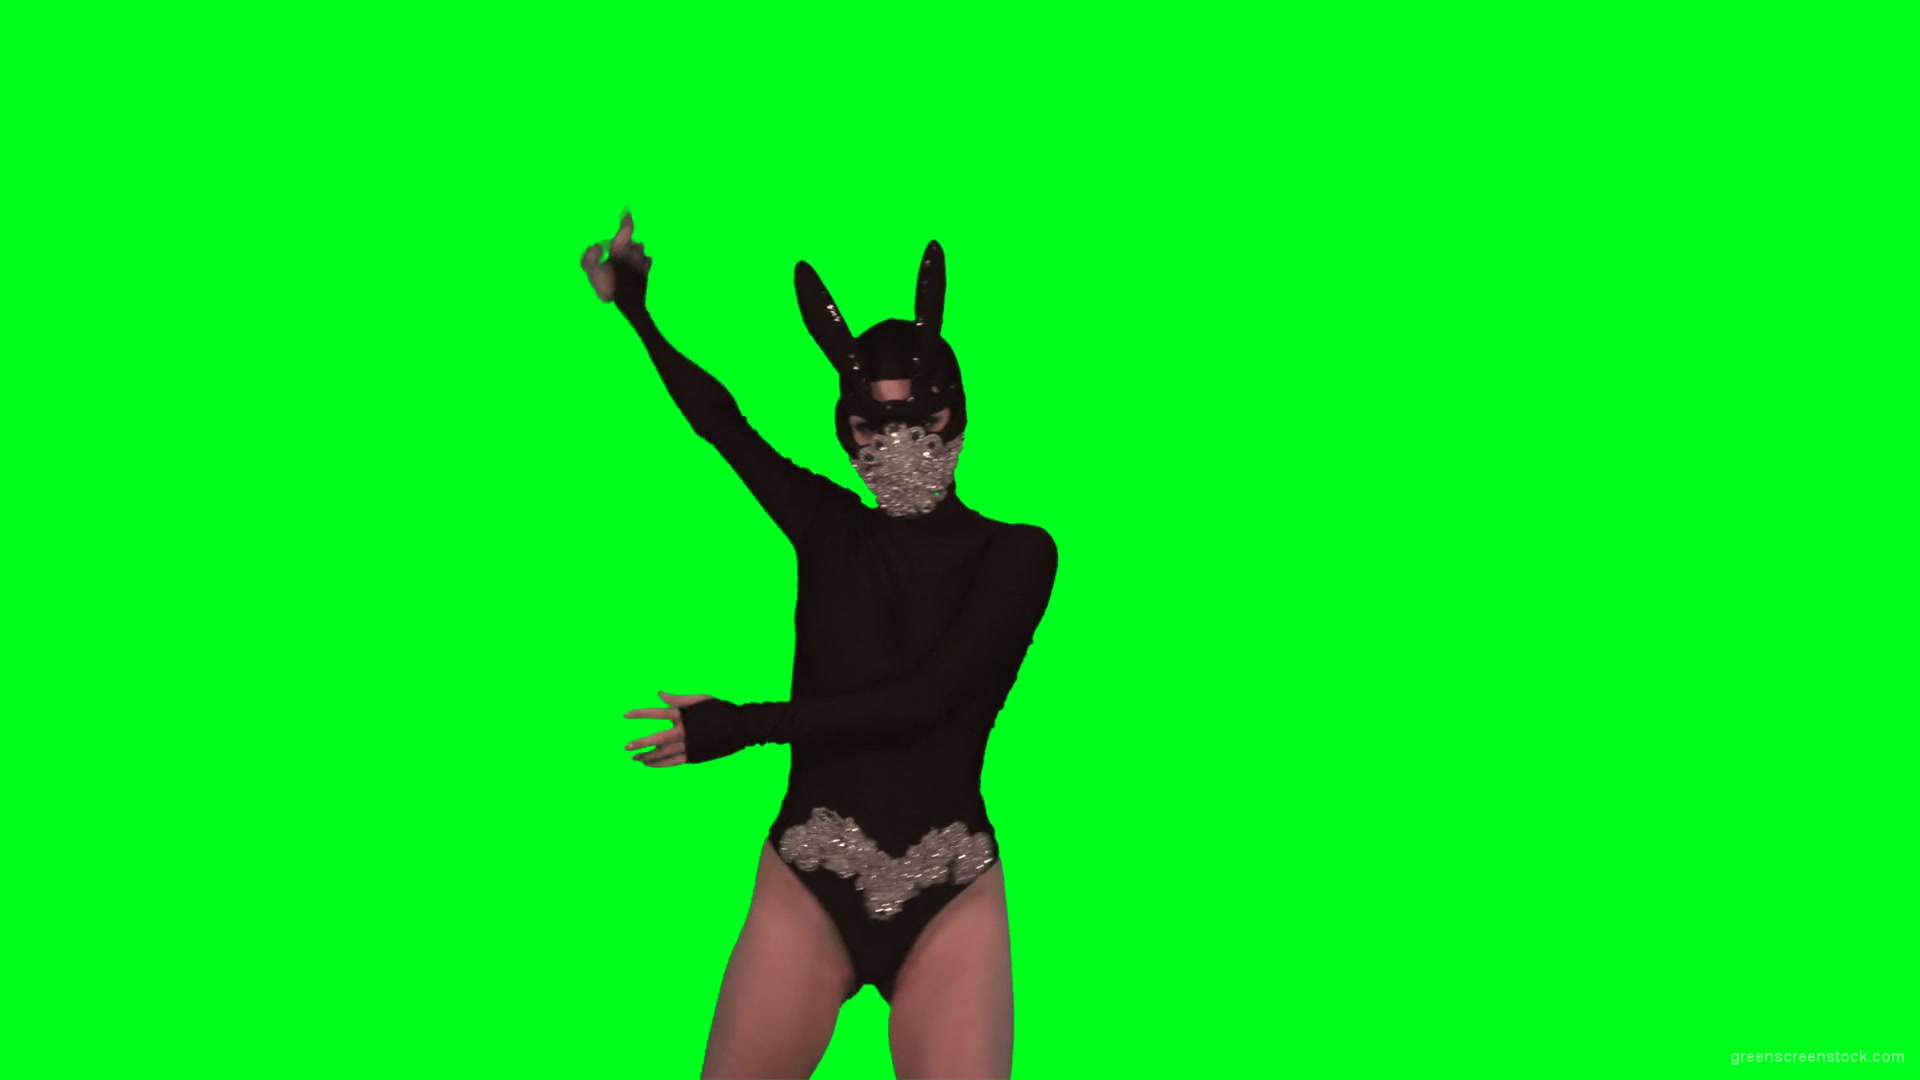 Rave-Calling-EDM-Go-Go-Dancing-Girl-performs-on-green-screen-4K-Video-Footage-1920_009 Green Screen Stock